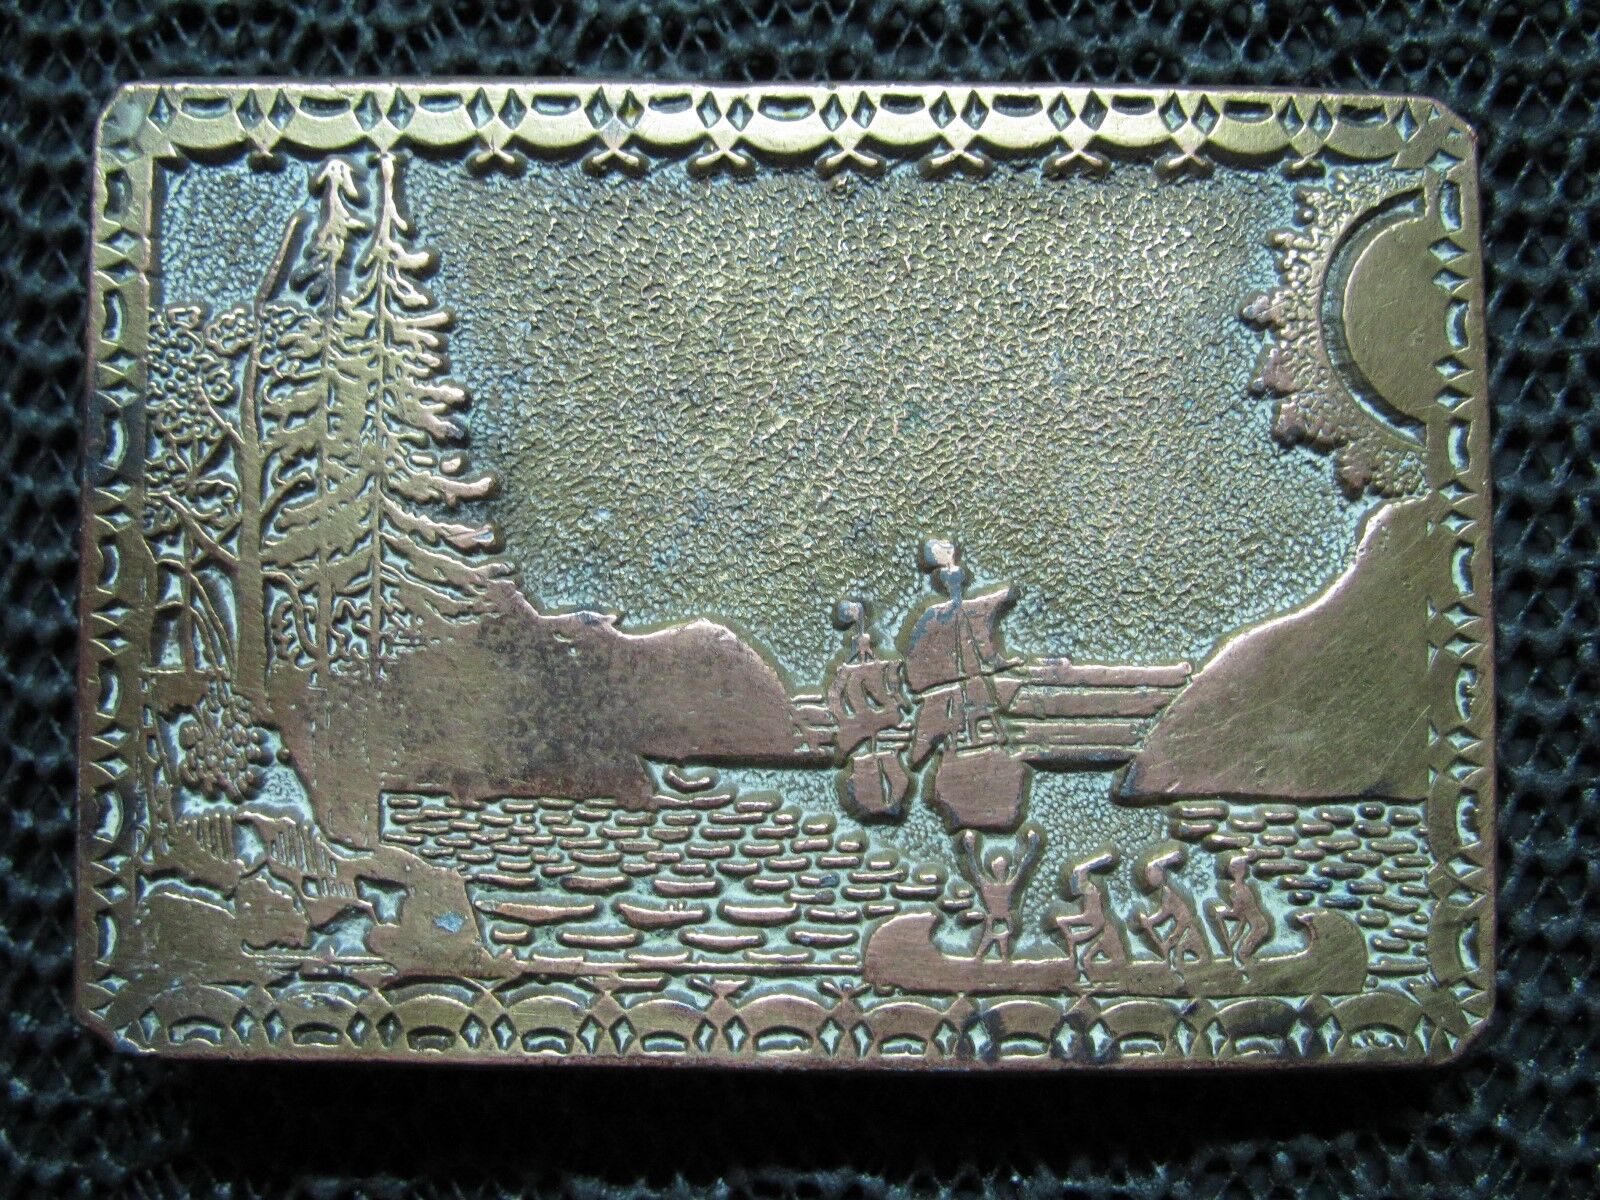 NATIVE AMERICAN & EARLY SETTLERS SCENE BELT BUCKLE VINTAGE RARE INSTYLE 1980